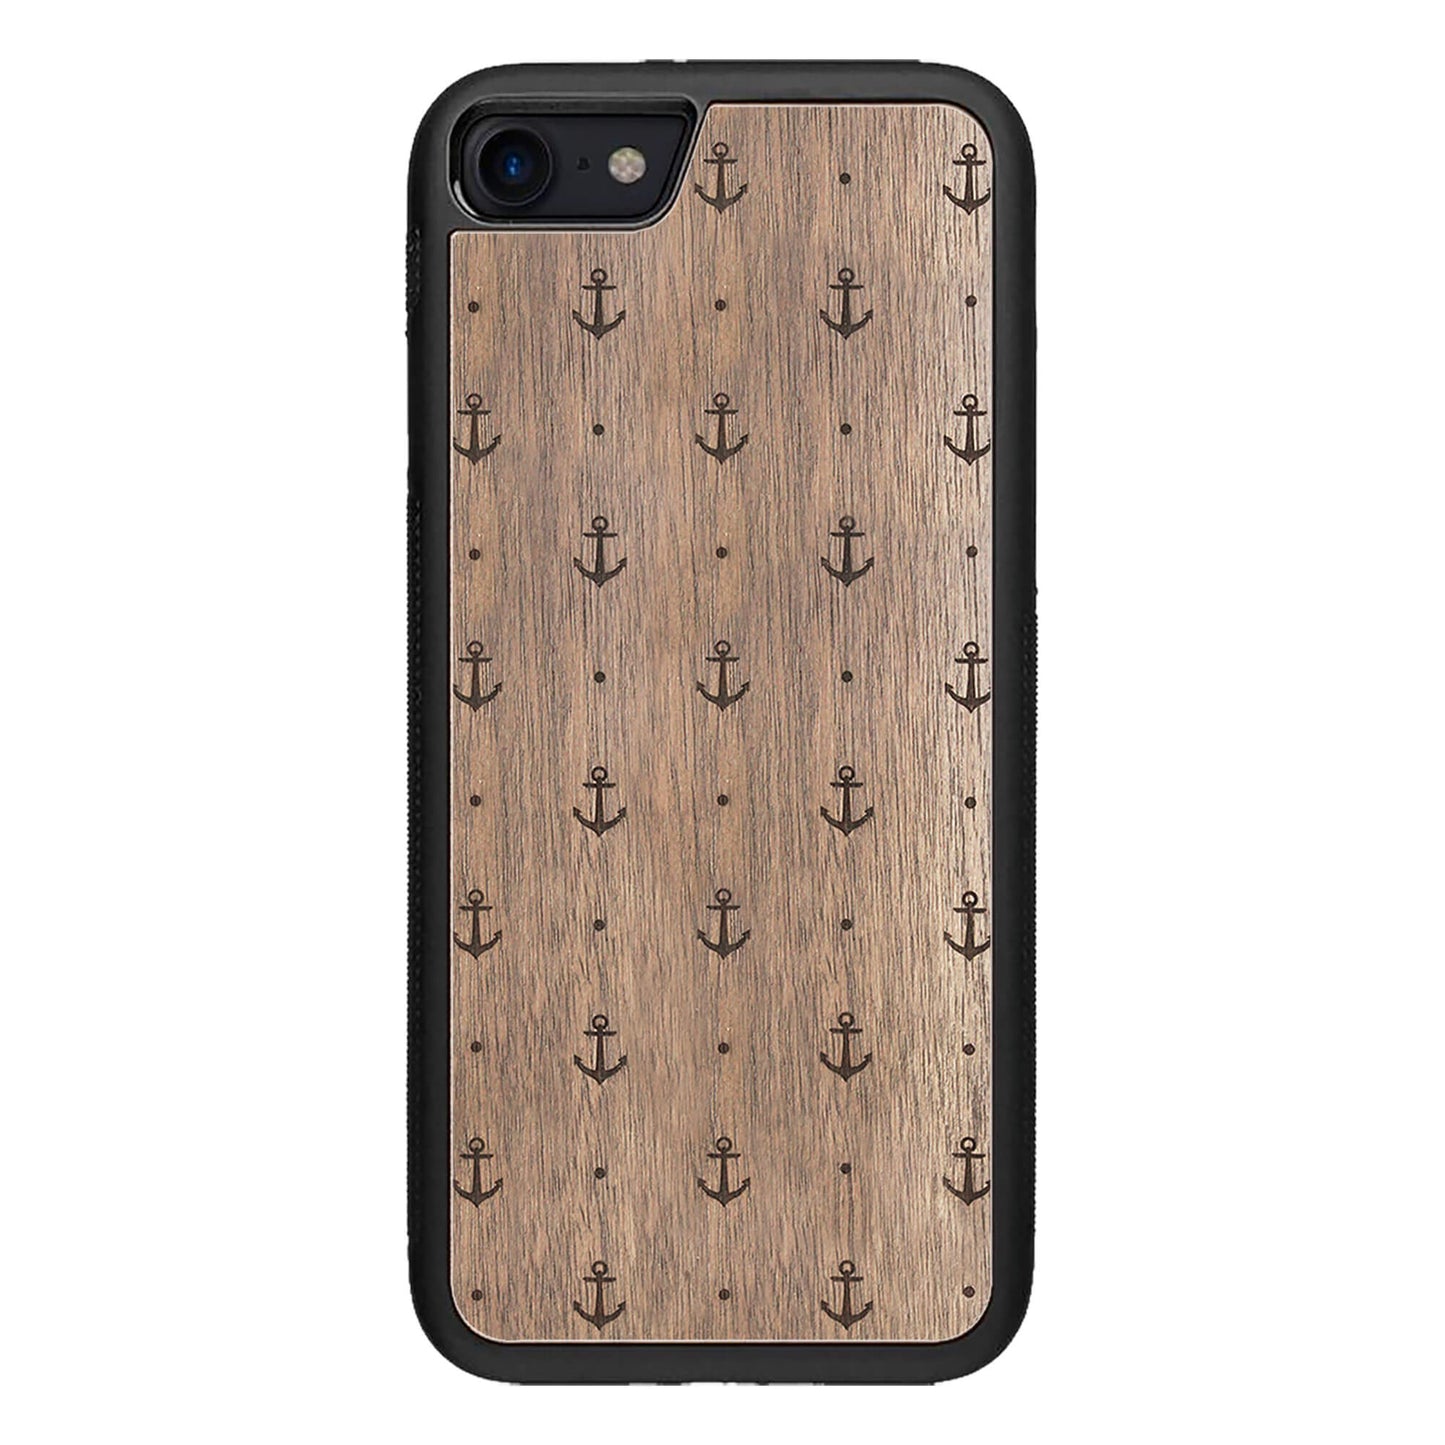 Wooden Case for iPhone SE 2 generation case Anchor